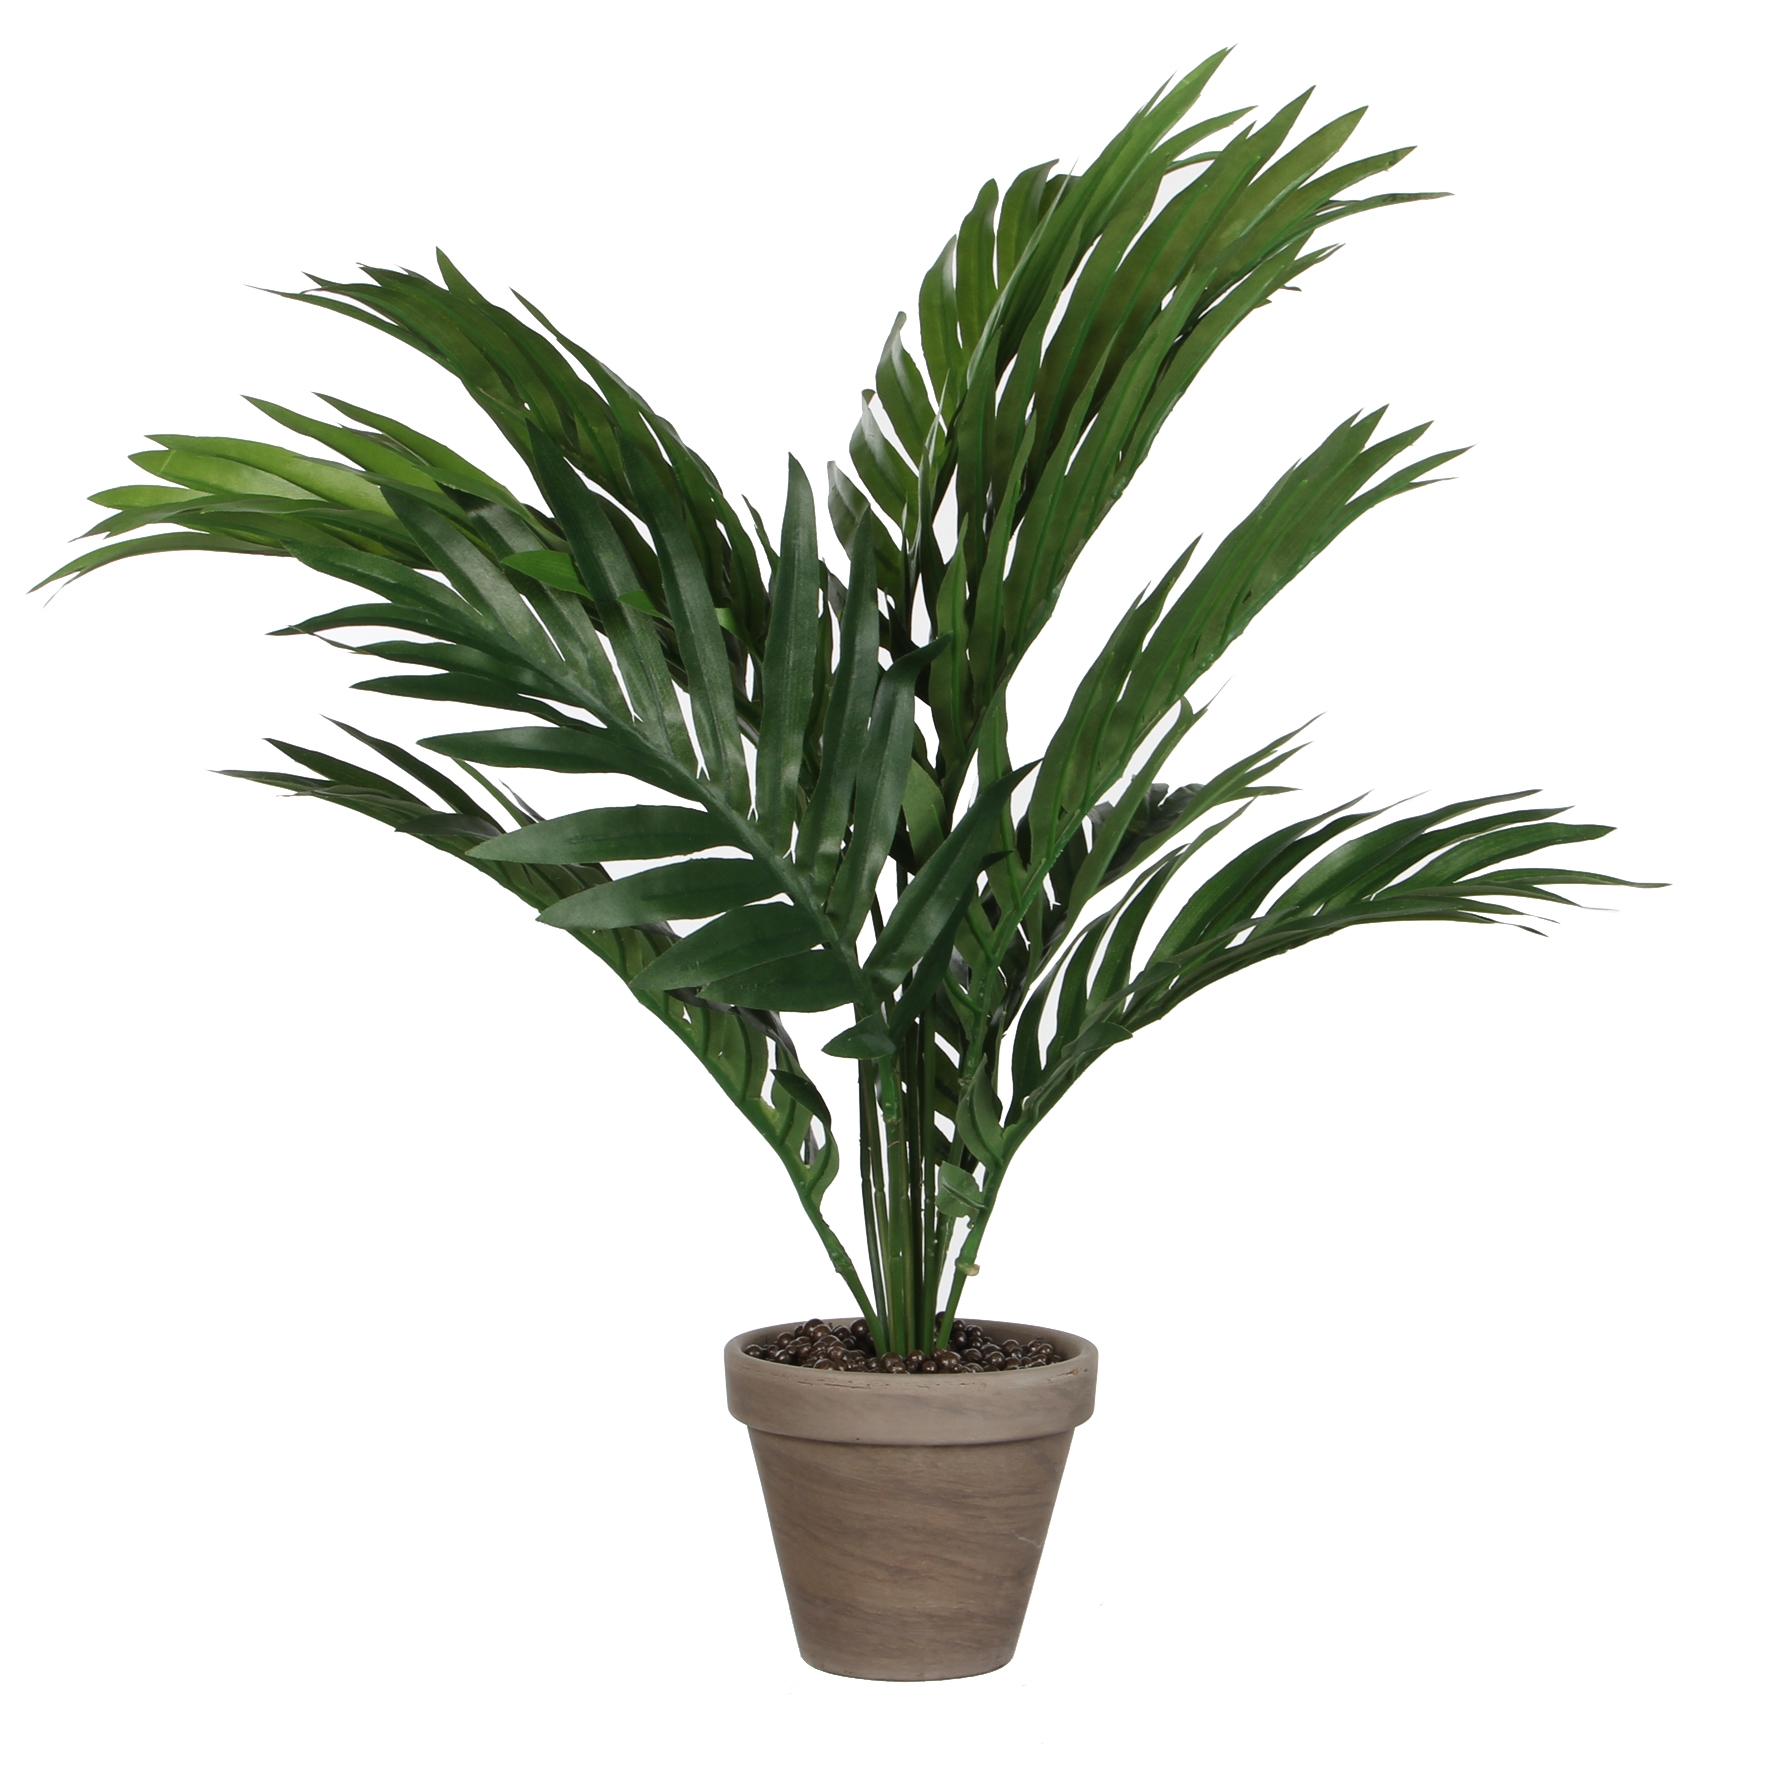 Picture of Palm Areca groen in pot 45x60 cm 